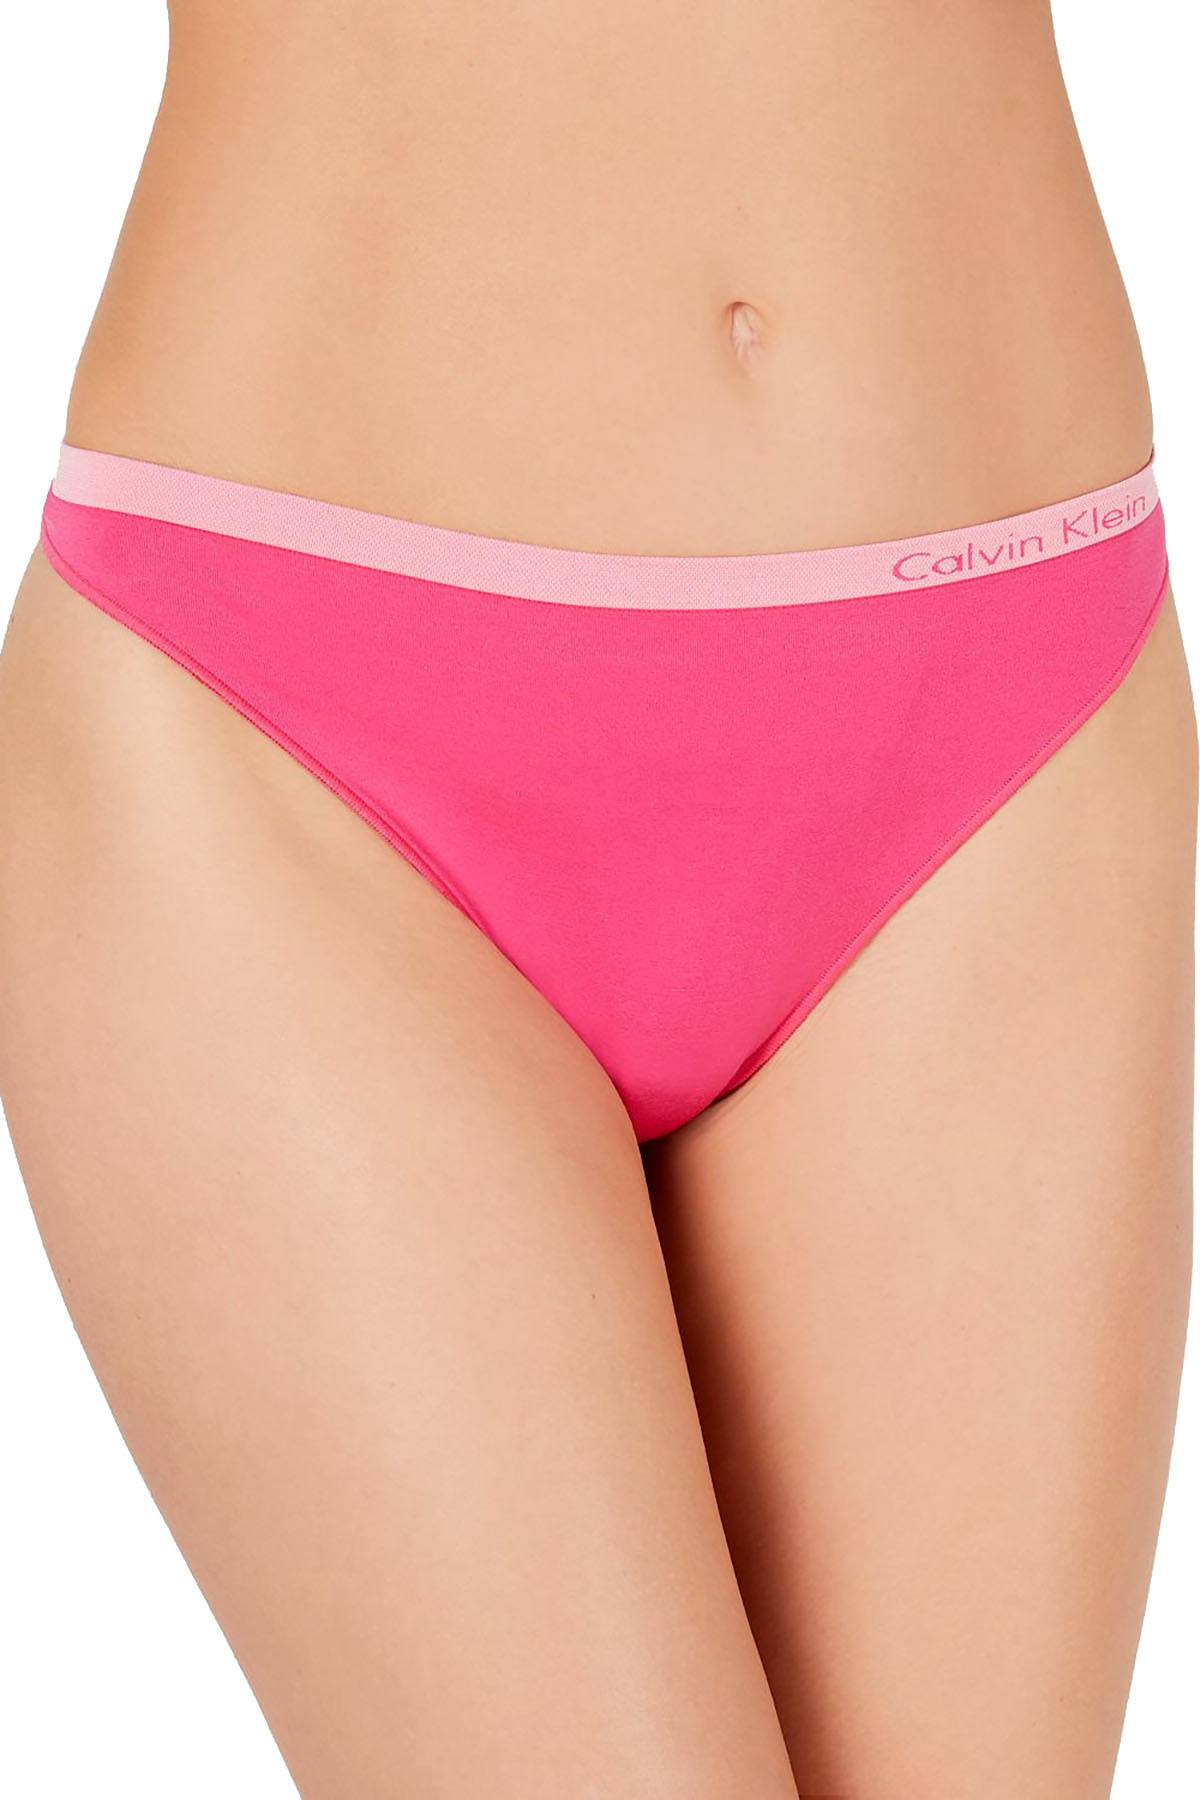 Calvin Klein Pure Seamless Thong in Thrill